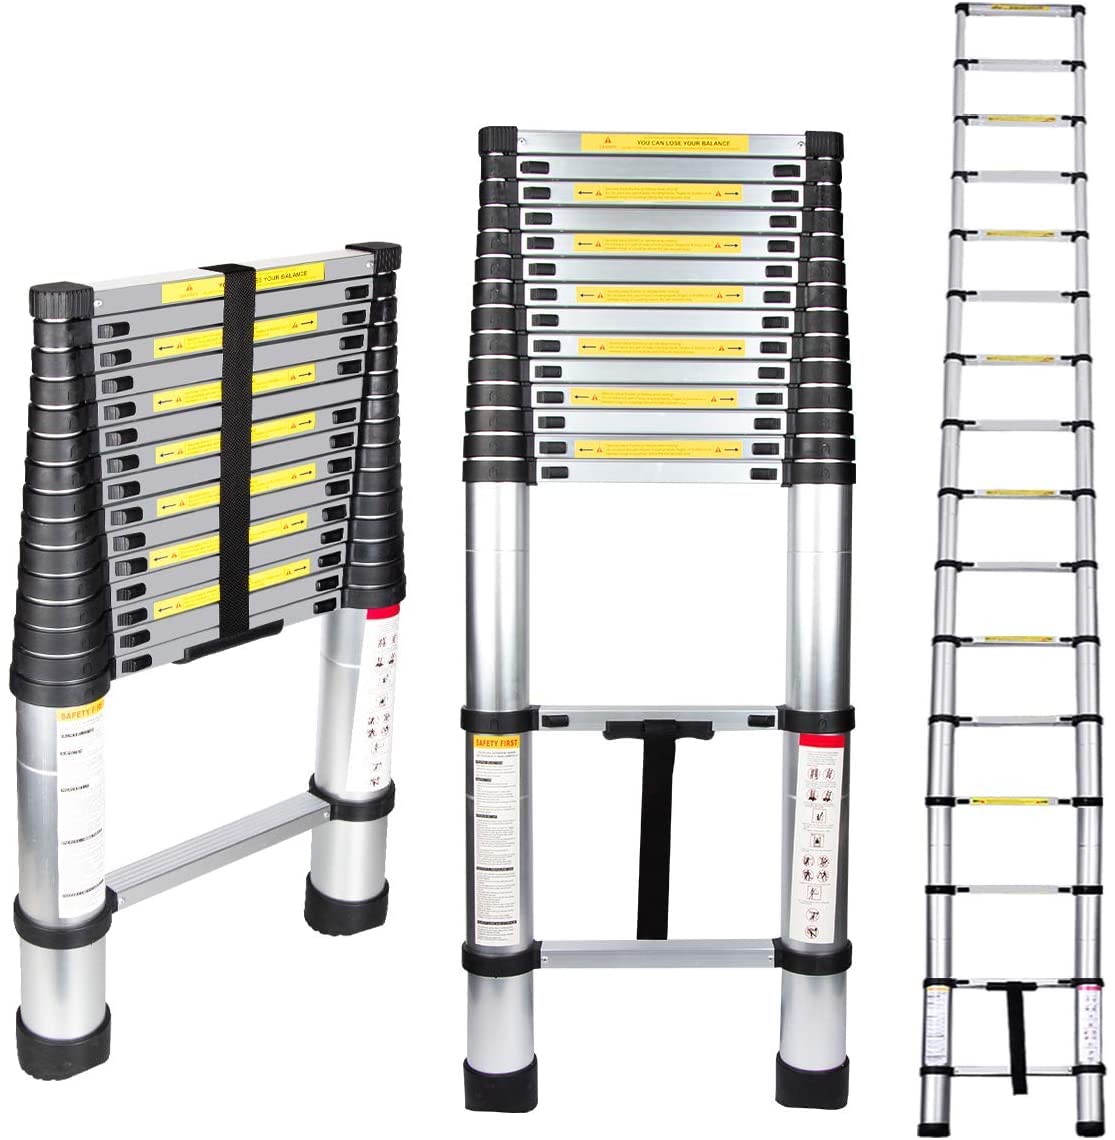 KRISHYAM® Telescoping Telescopic Extension Ladder 23.5 FT/7.2m Aluminum Alloy Extendable Lightweight Ladder Steps Safety for Roofing Business, Household Use, Outdoor Work, 330 lbs Capacity